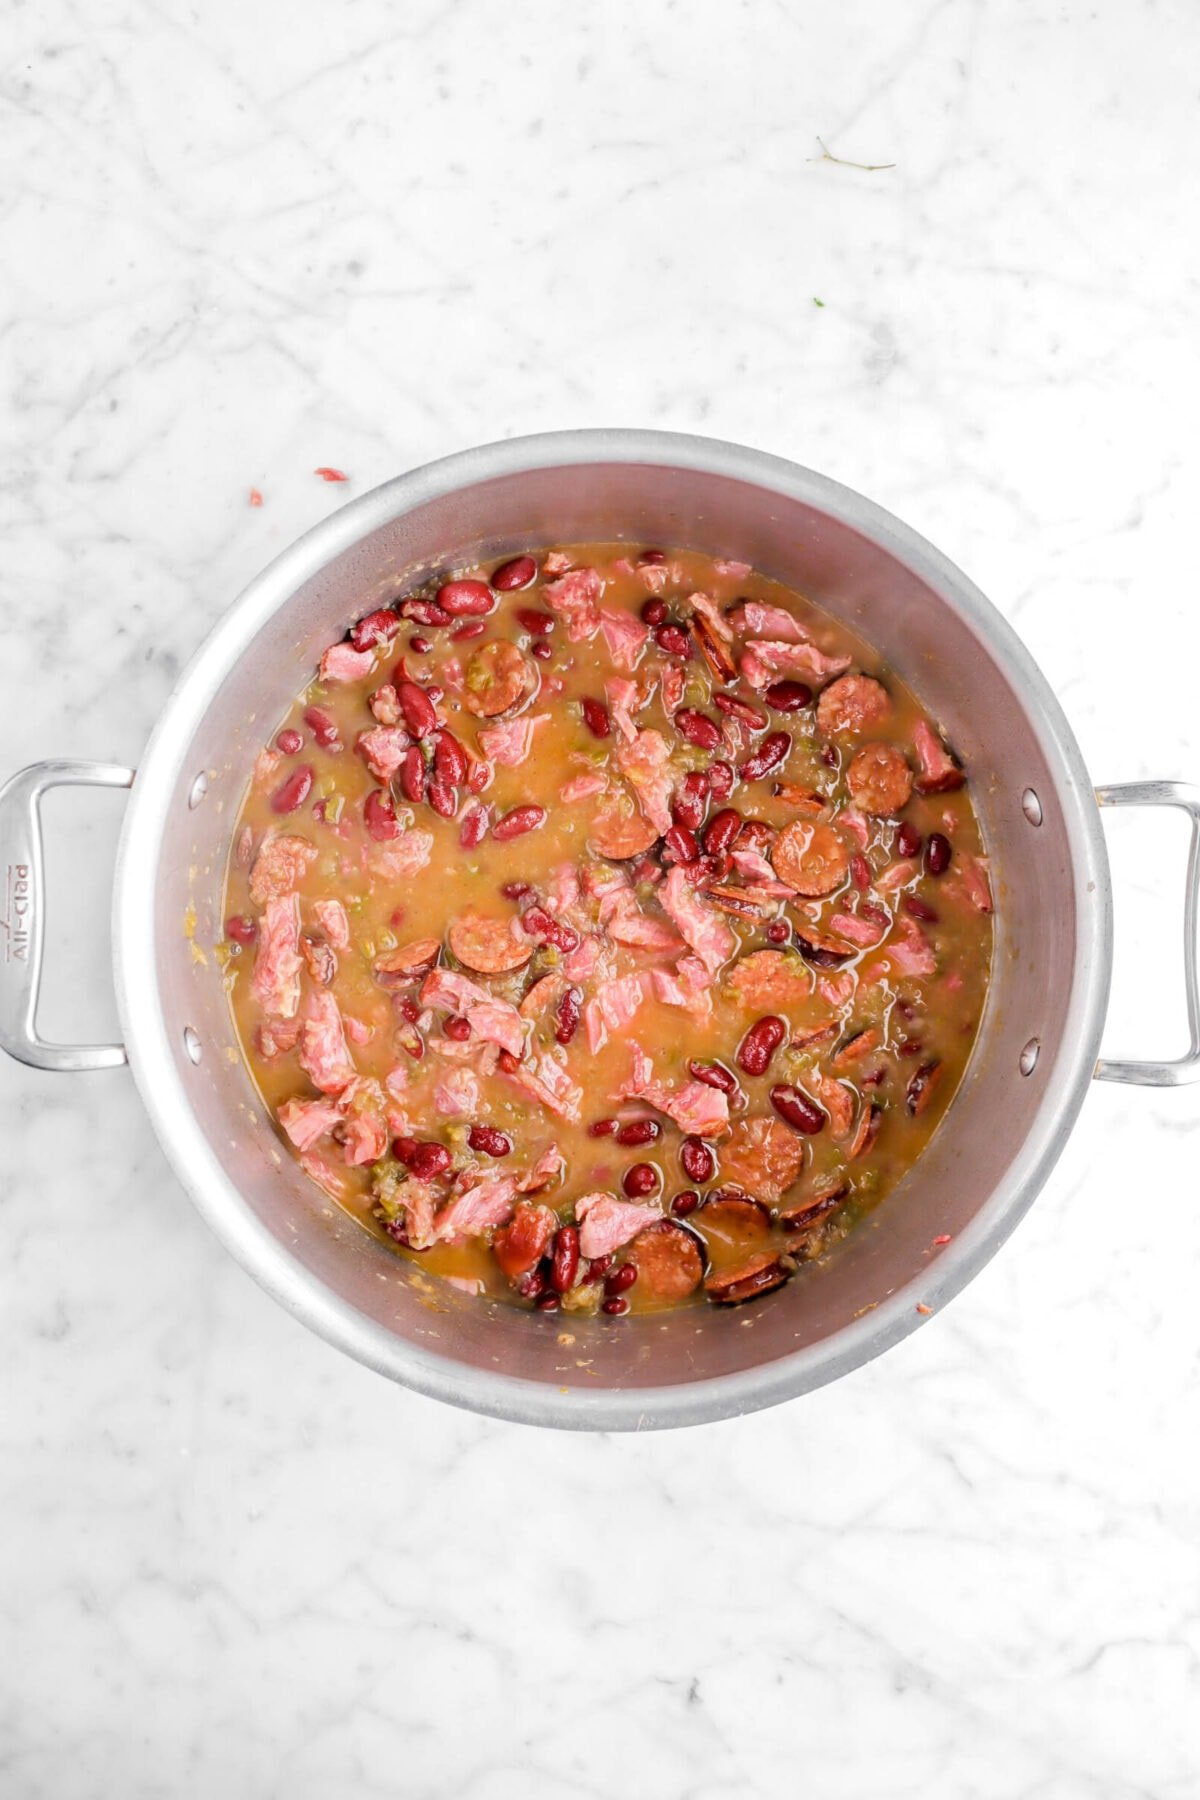 ham stirred into red beans